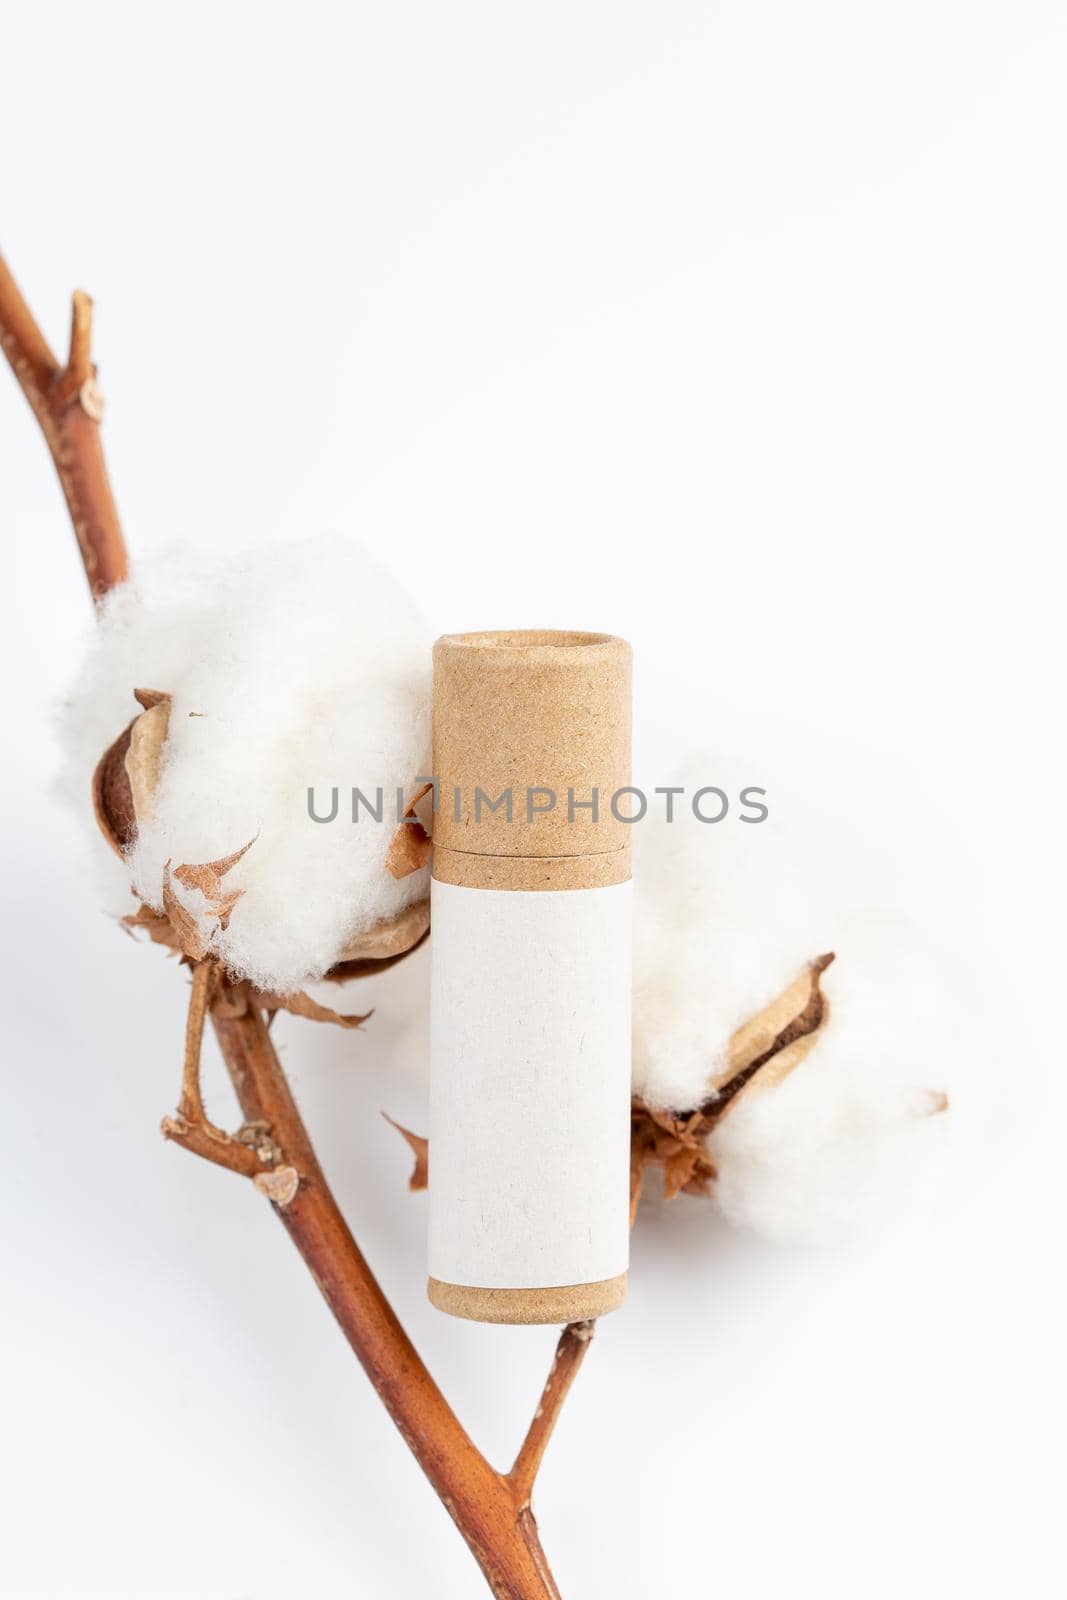 Zero Waste Lipstick packaging. Lip balm tube made of paper. Plastic free make up concept